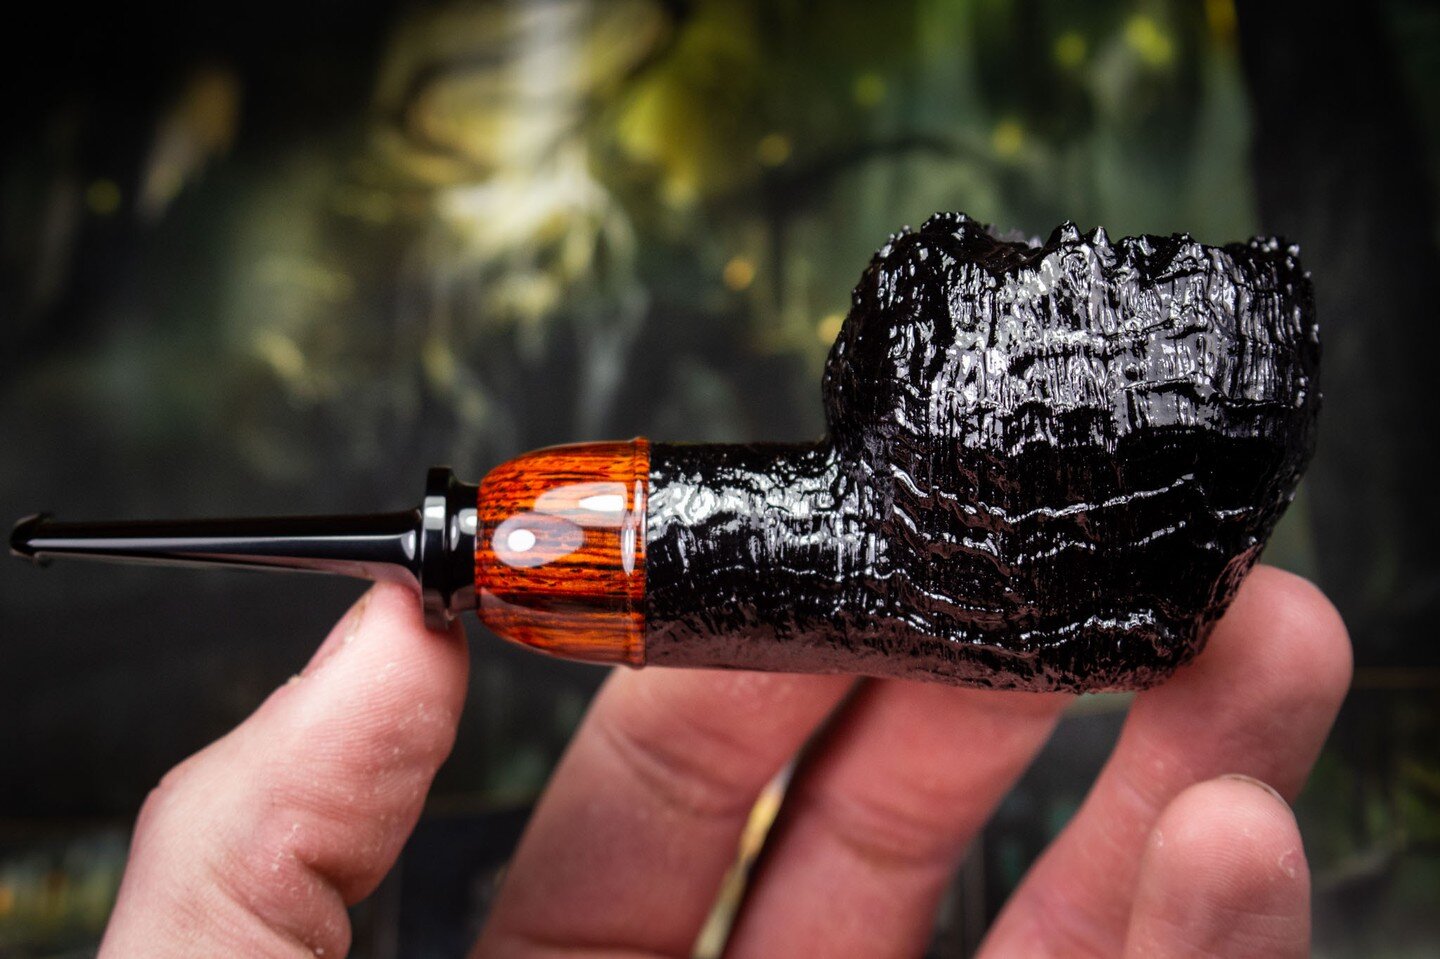 Happy finished-pipe-Friday! I haven't posted a lot of stuff lately, production has been jammed up, but this Gronkle slipped through today! 

I haven't done any work with cocobolo in a long time, but I decided to finish a dome shank extension in ultra